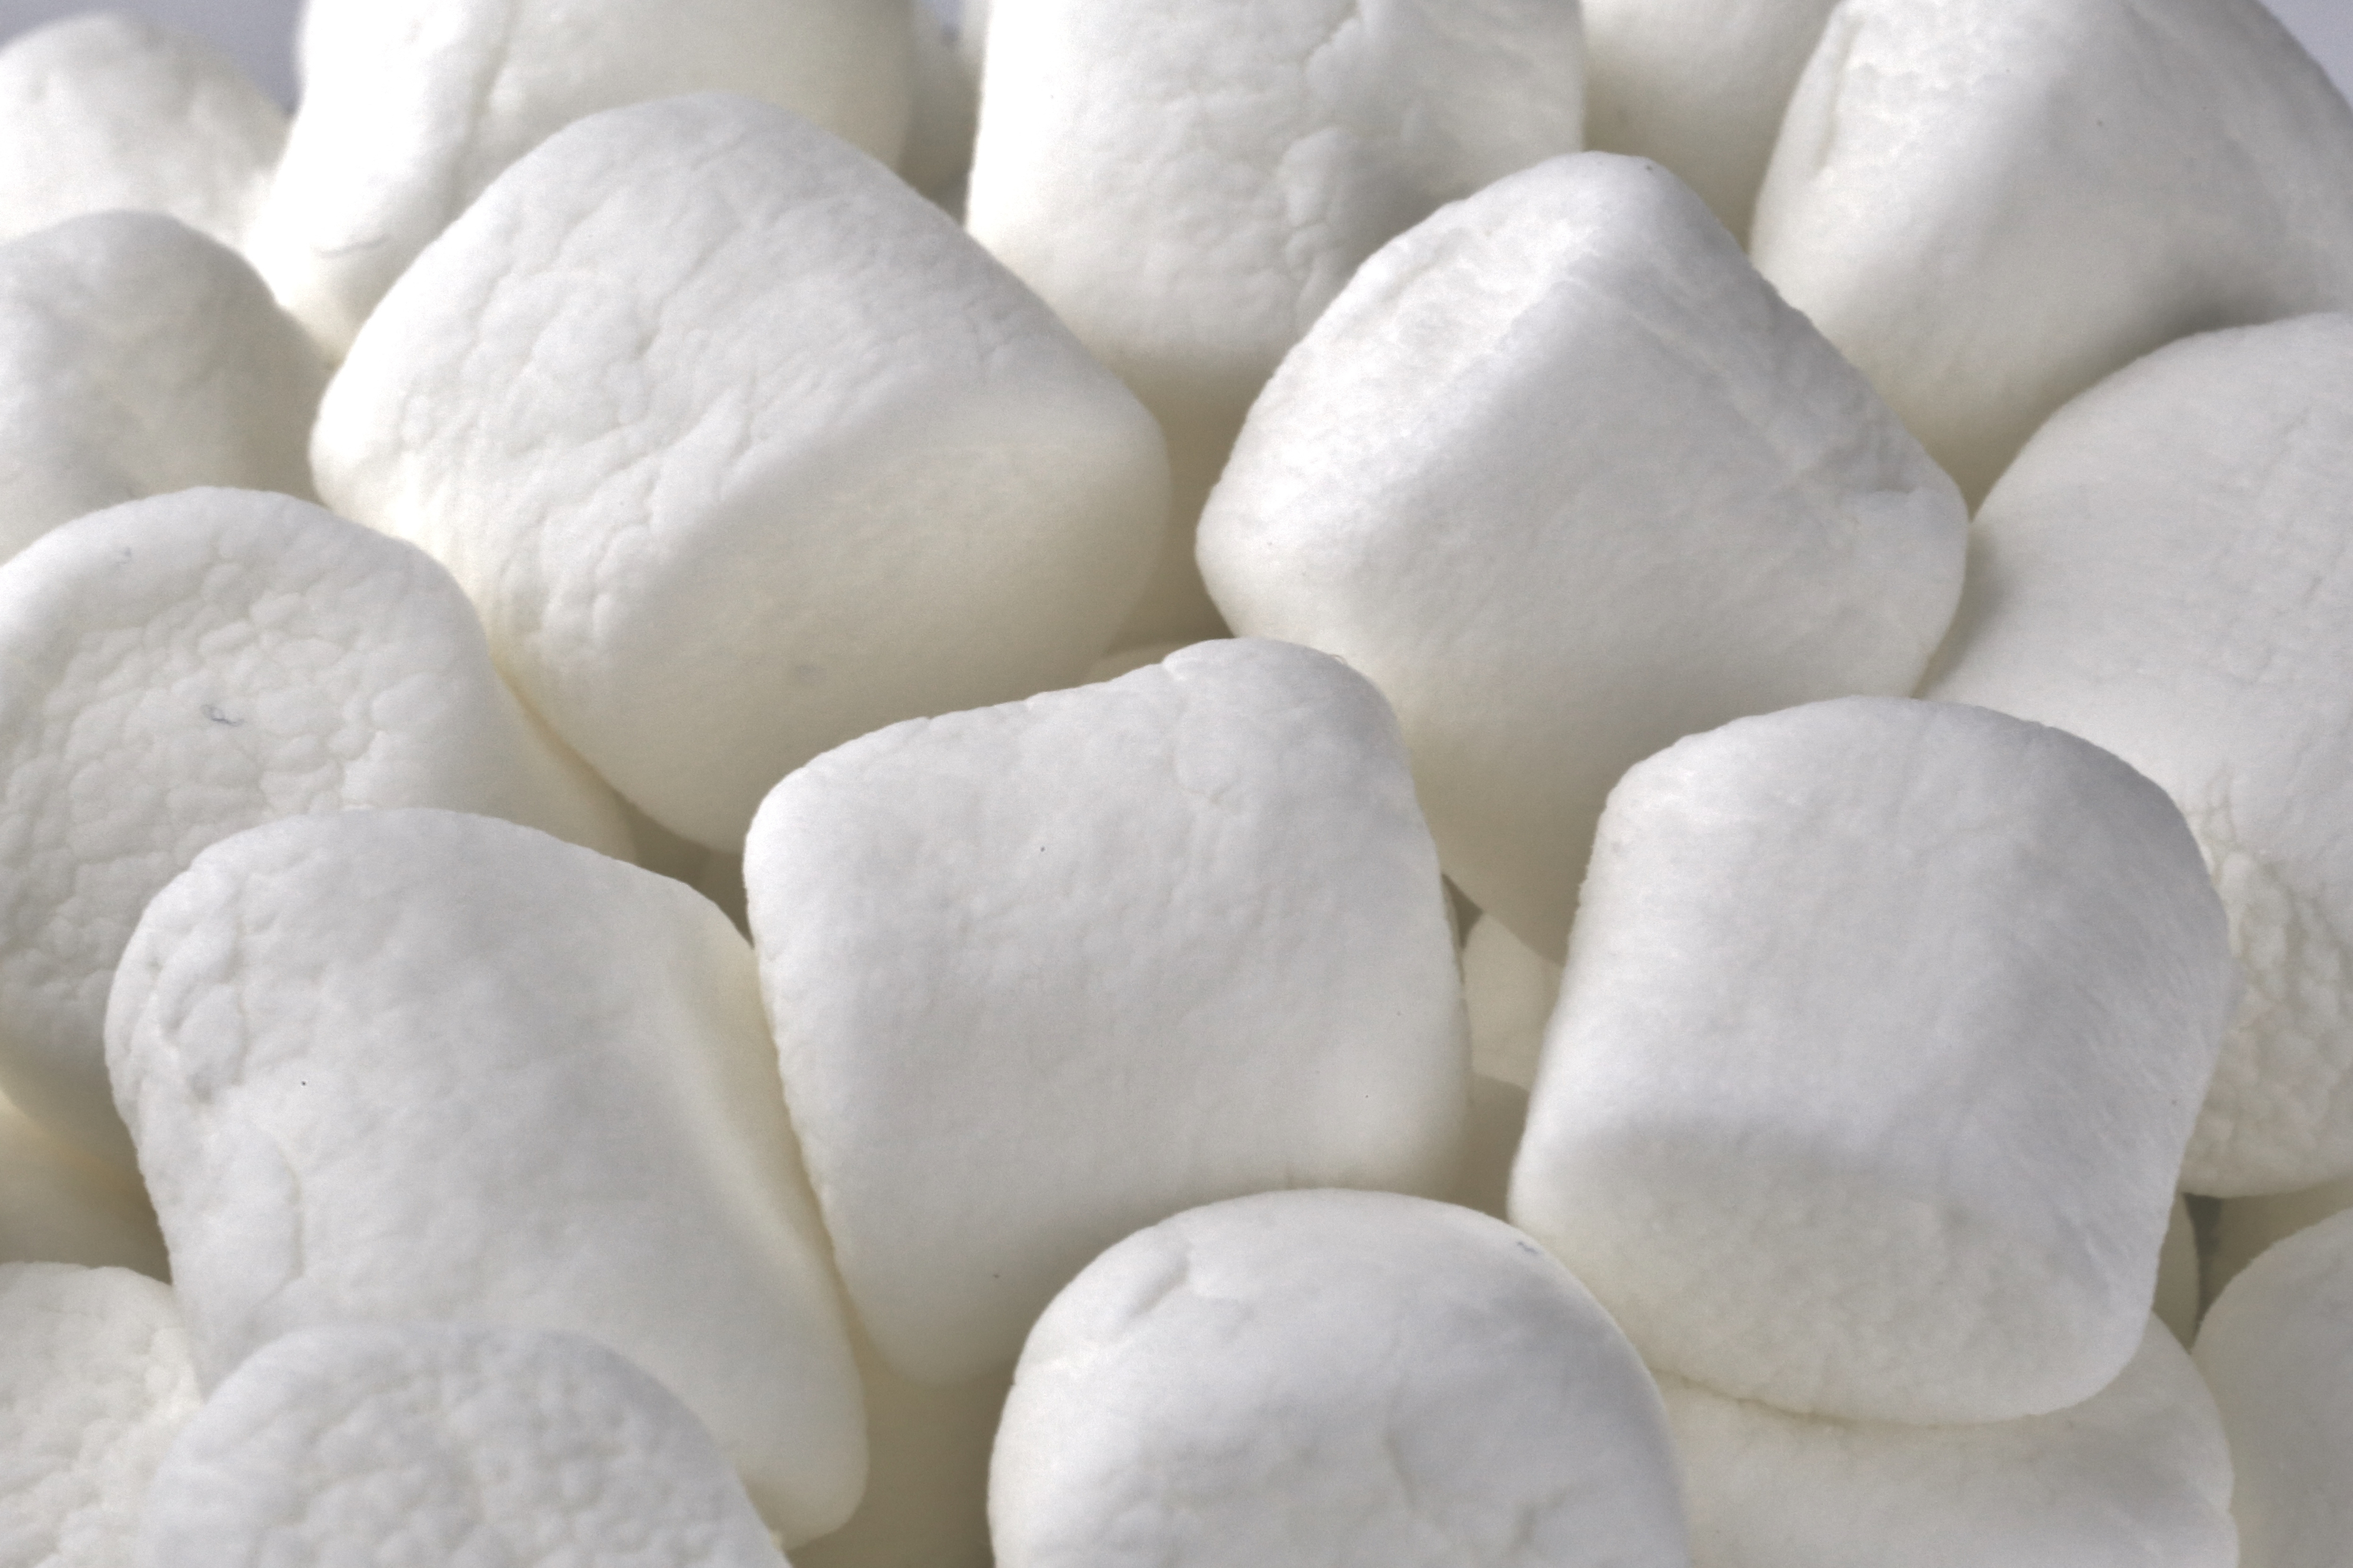 Close-up of multiple marshmallows filling the frame